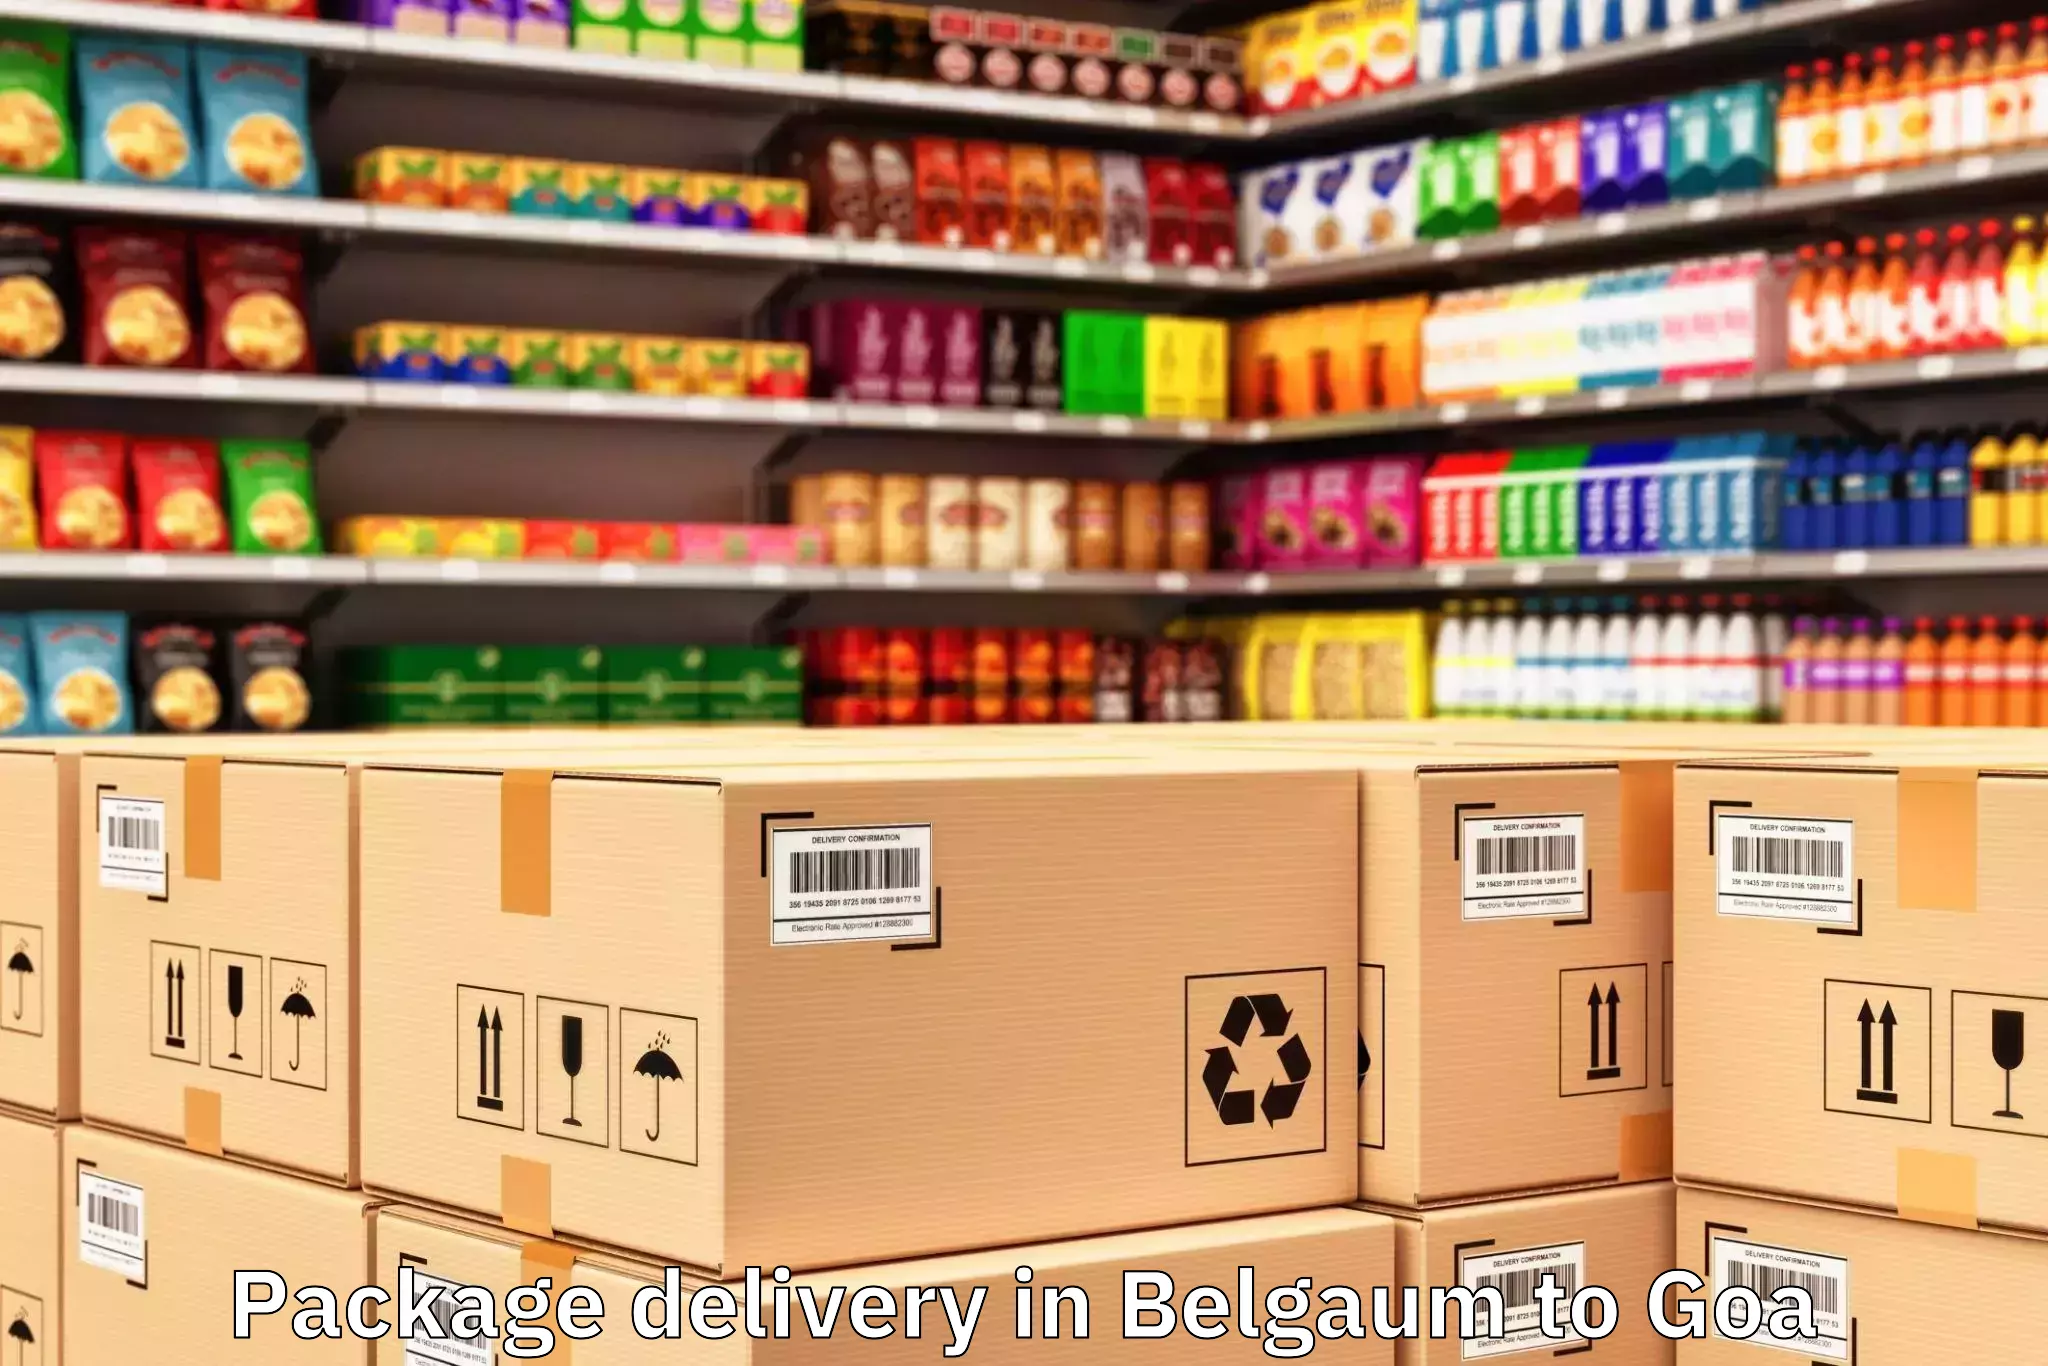 Belgaum to Goa Package Delivery